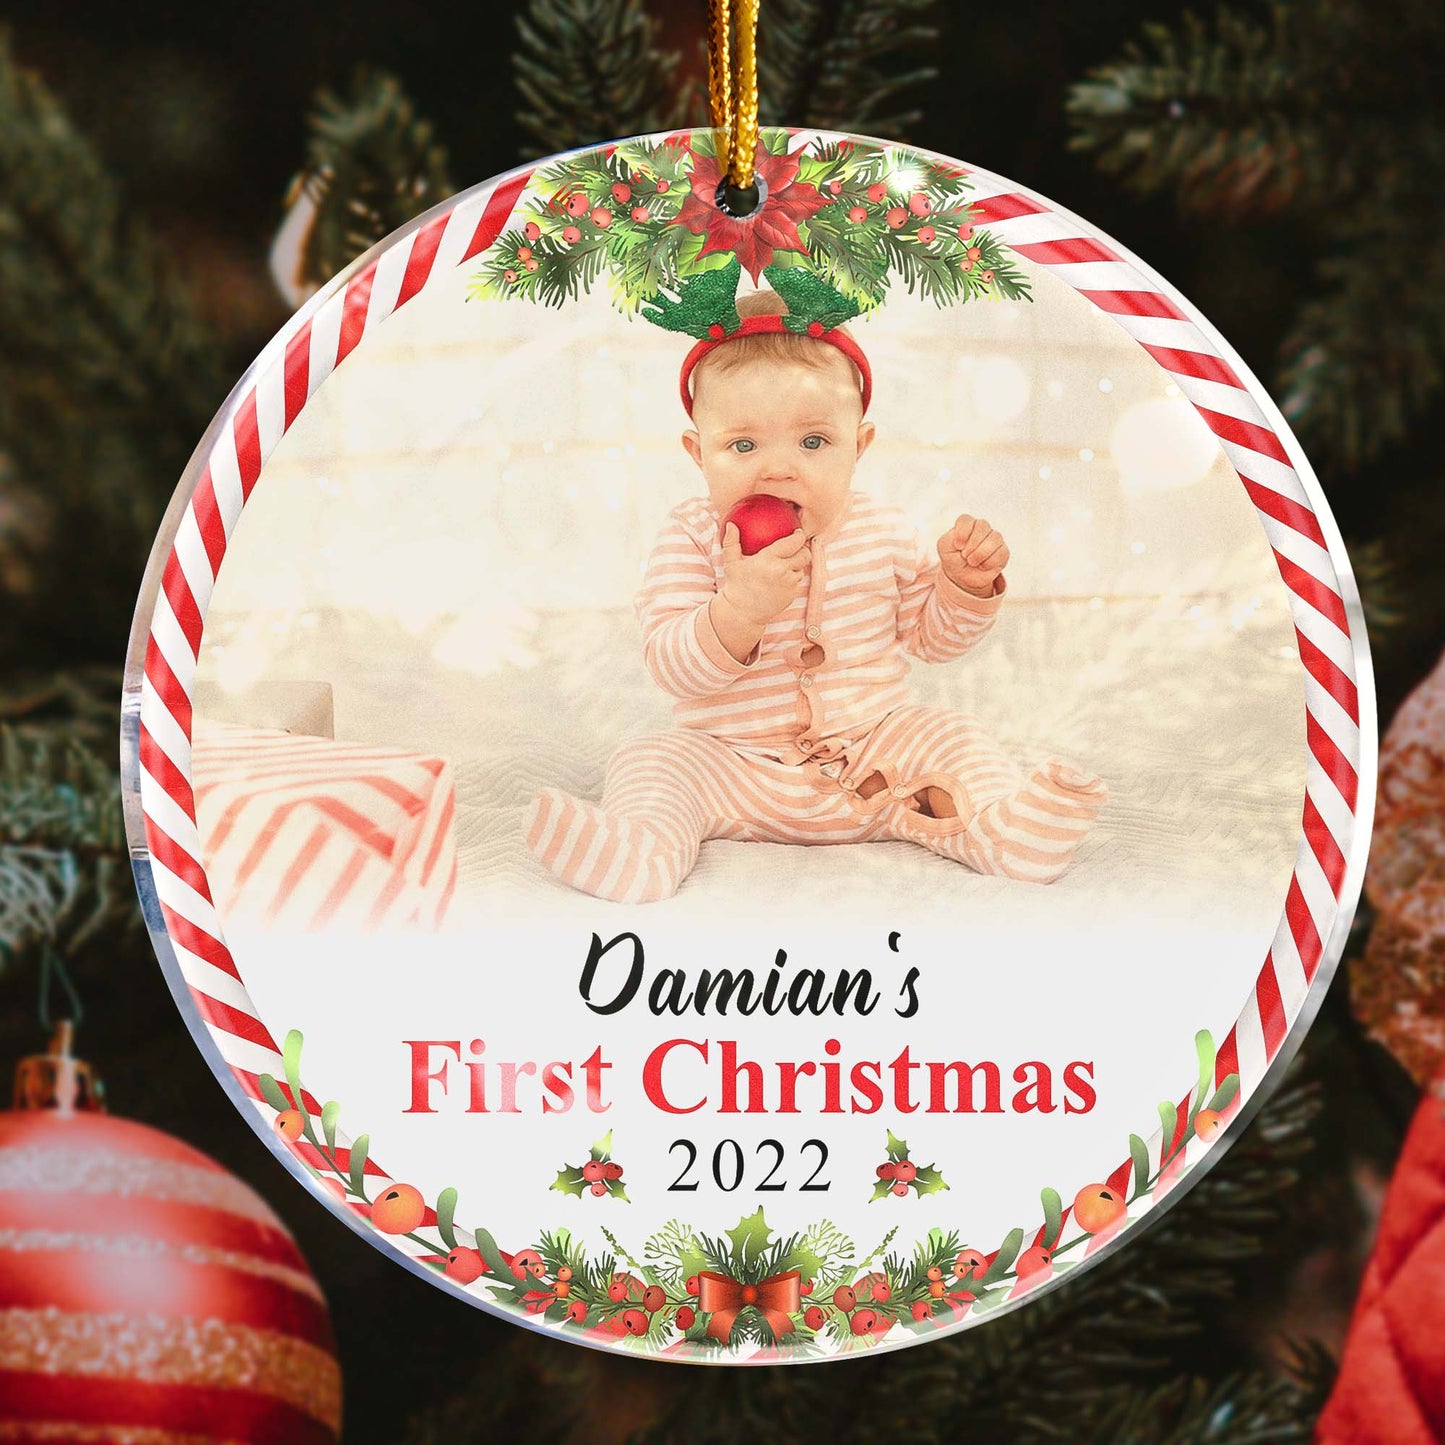 Baby Christmas - Personalized Circle Acrylic Ornament - Christmas Gift For Newborn Baby, New Baby, Baby Boy, Baby Girl